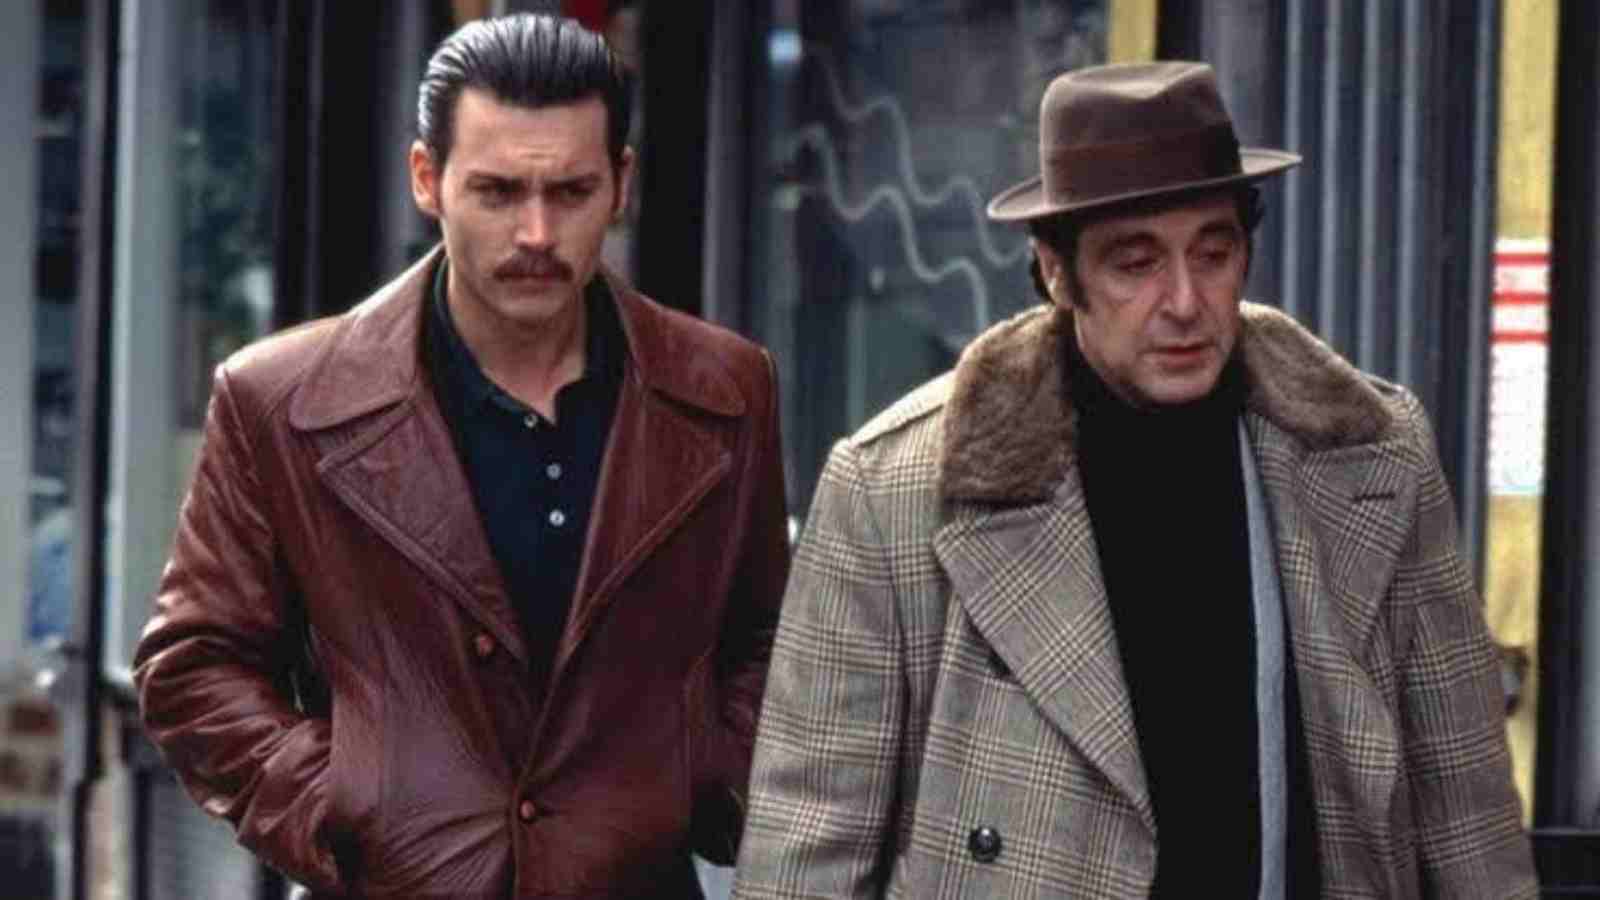 Co-stars Al Pacino and Johnny Depp will now co-produce the Amedeo Modigliani biopic